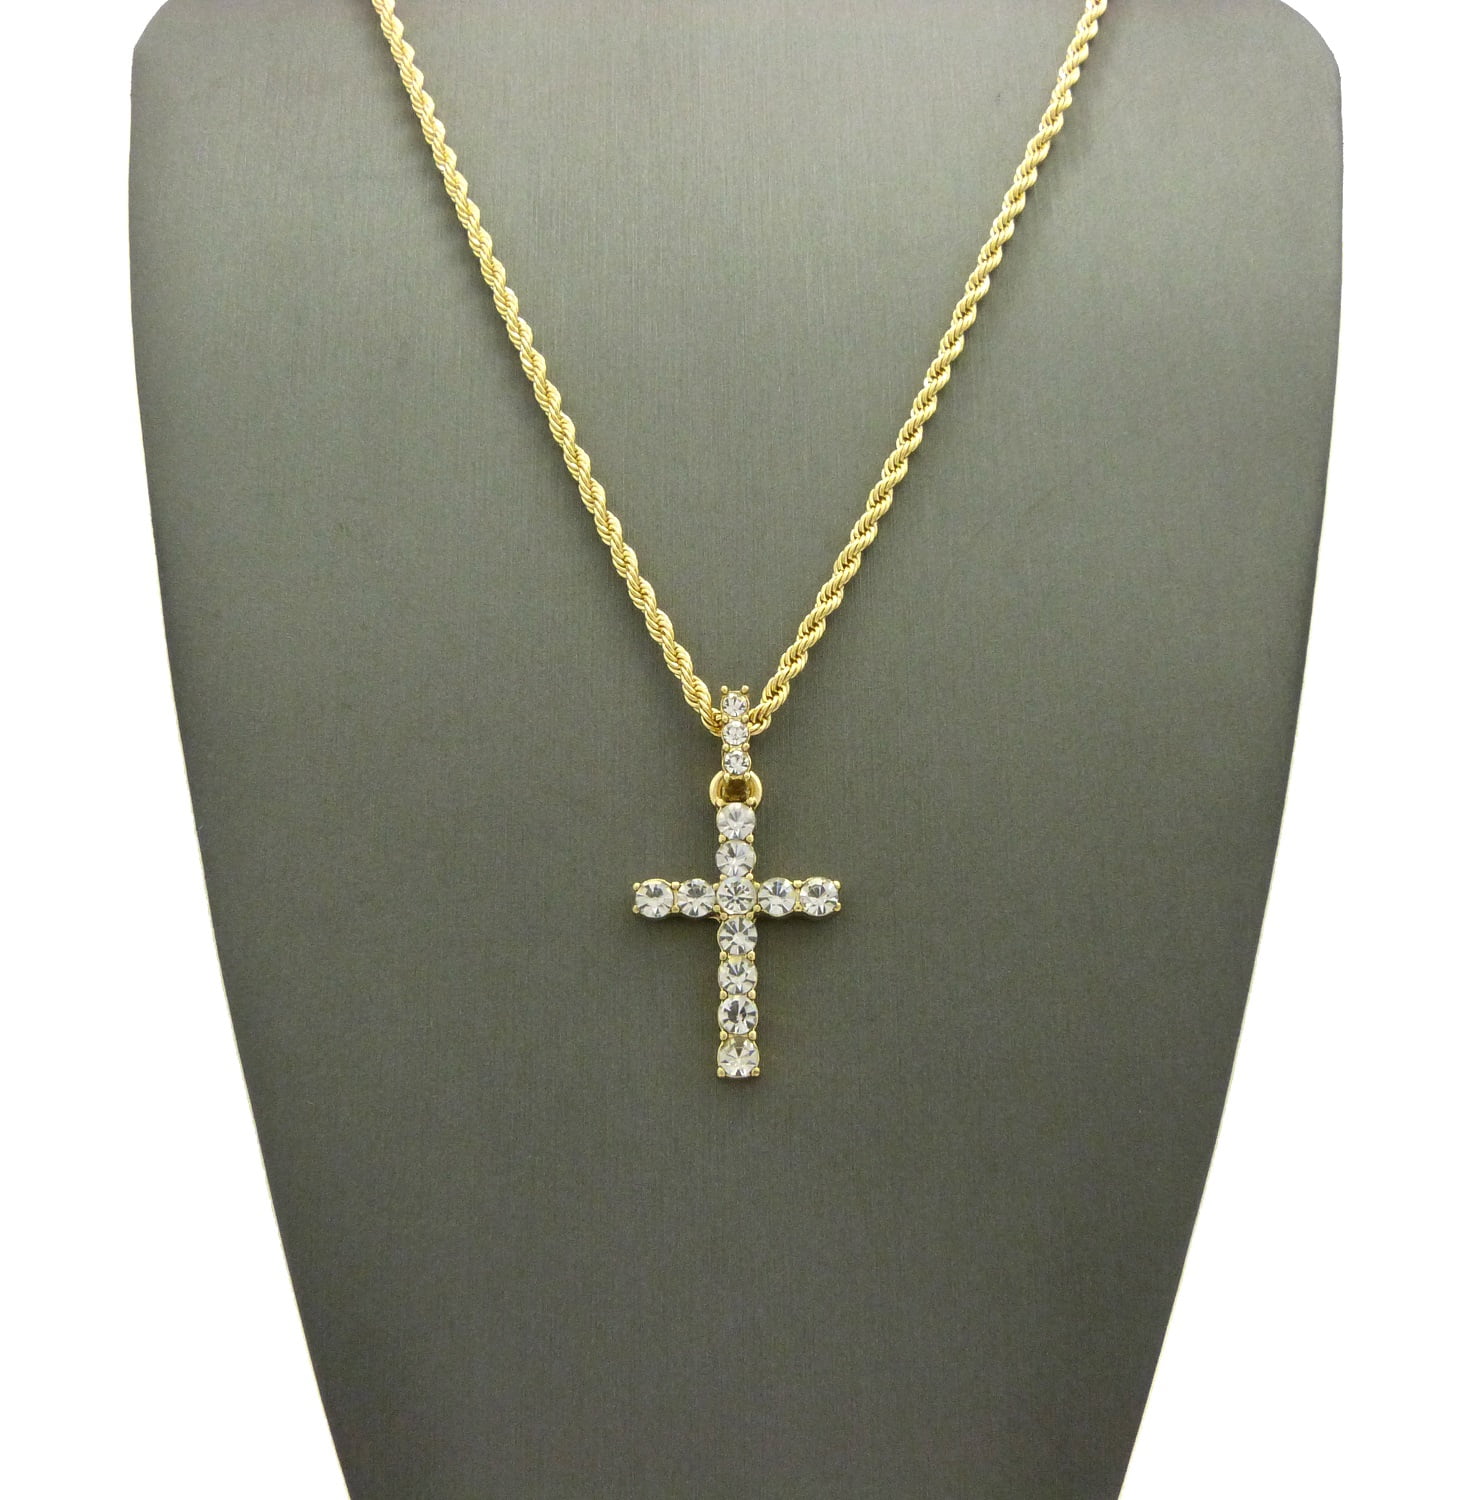 Passage 7 18K Real Gold Plated Jesus Christ Cross Pendant Necklace